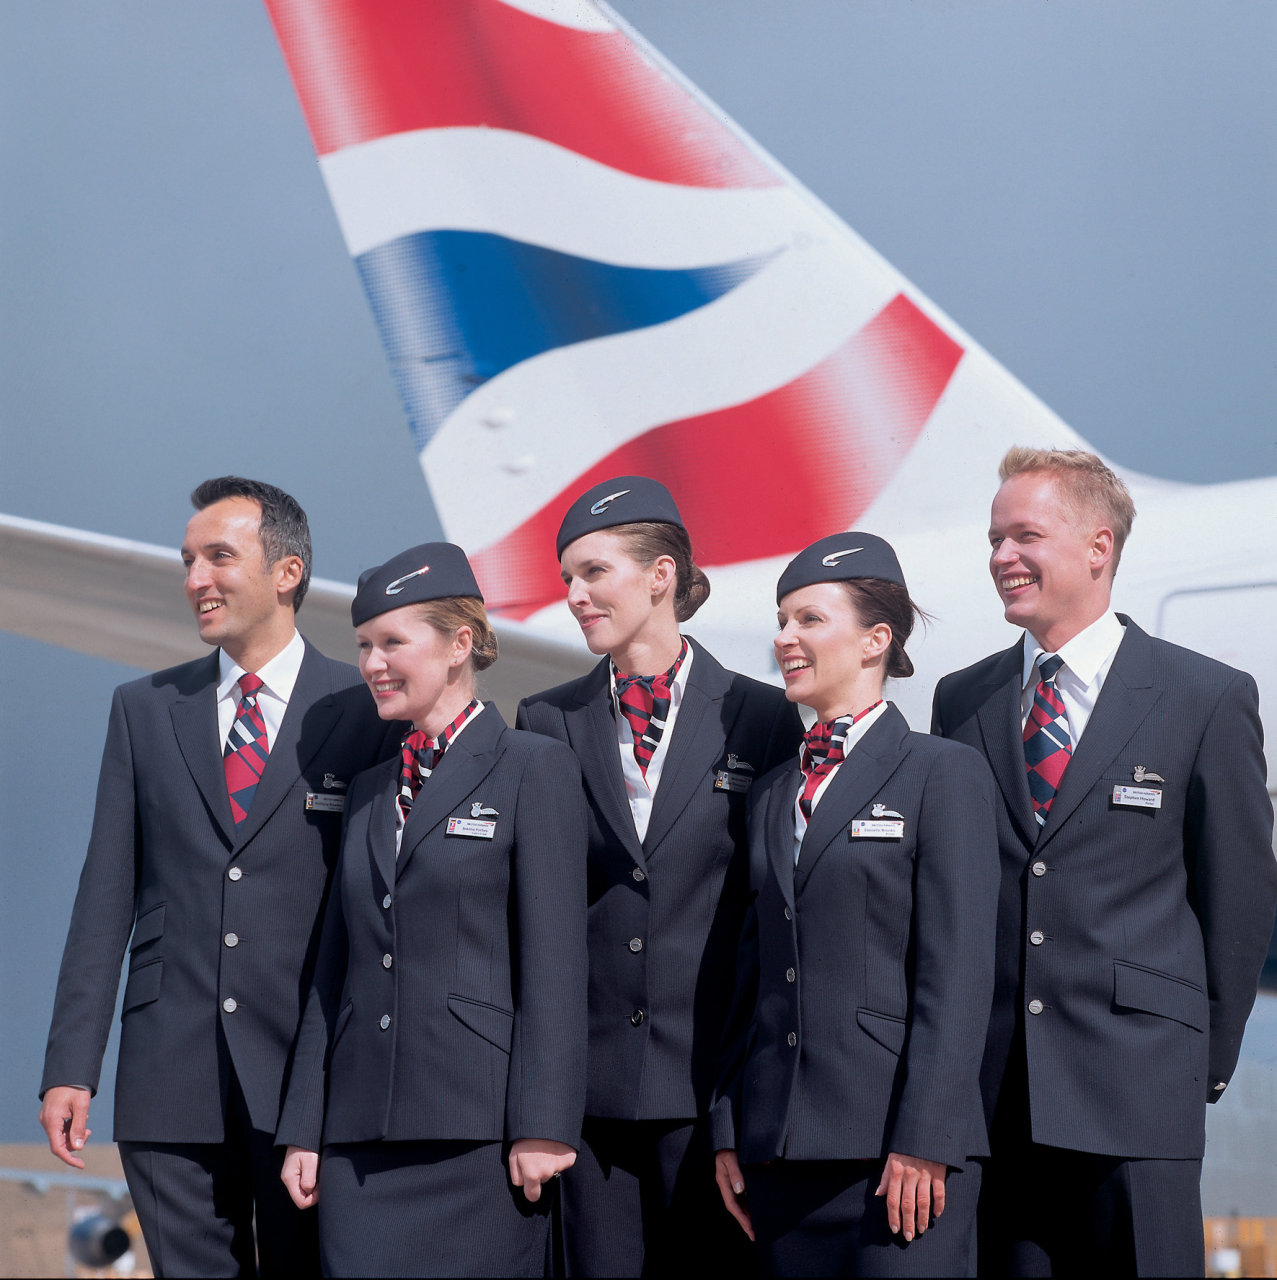 Some 96 British Airways employees serve every passenger flying from Baku to London (PHOTO)